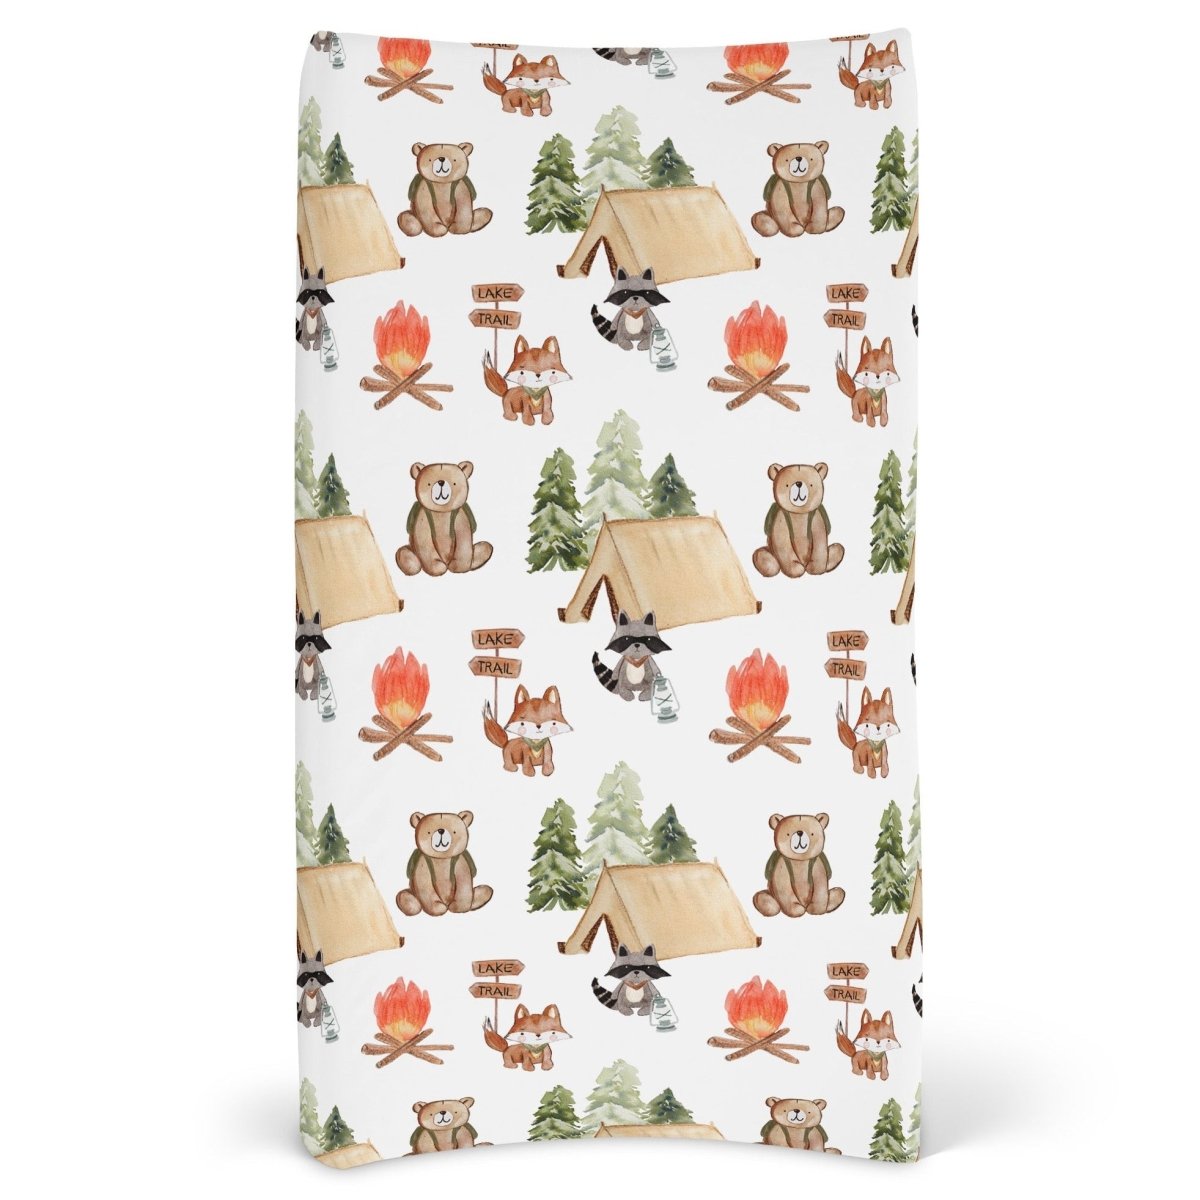 Woodland Camper Changing Pad Cover - gender_boy, Theme_Adventure, Theme_Woodland